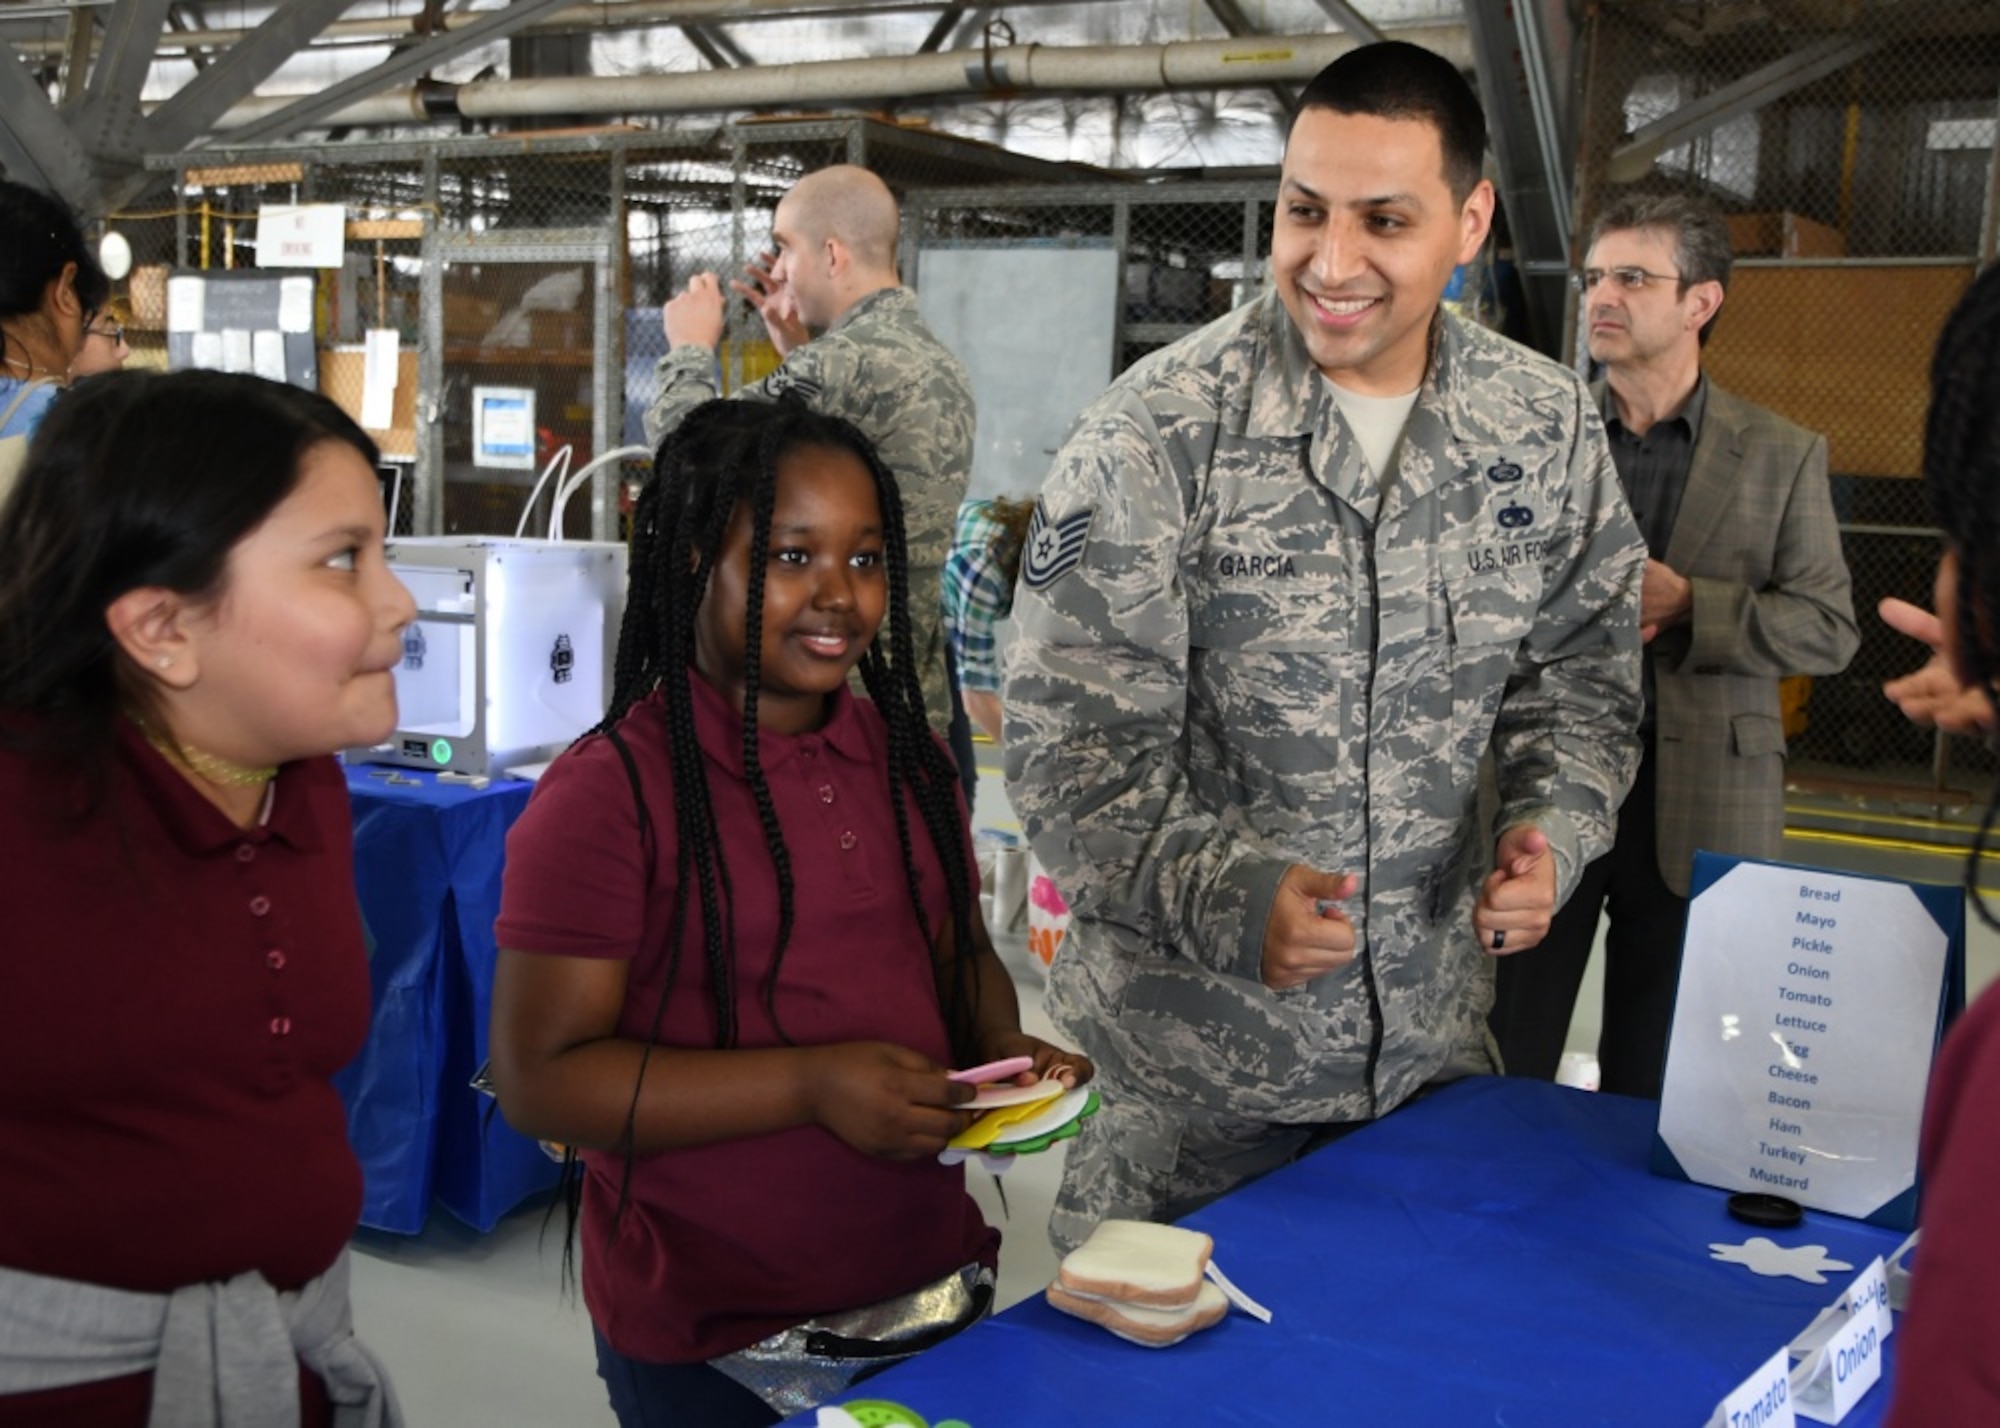 Participants in the Legends in Flight Joint Base Andrews  Air and Space Expo 2019 look at various set-ups in the Science Technology Engineering and Math hangar on JB Andrews, Md.,  May 10, 2019. More than 7,000 local students came out to the STEM hangars. (U.S. Air Force photo by Staff Sgt. Cierra Presentado)